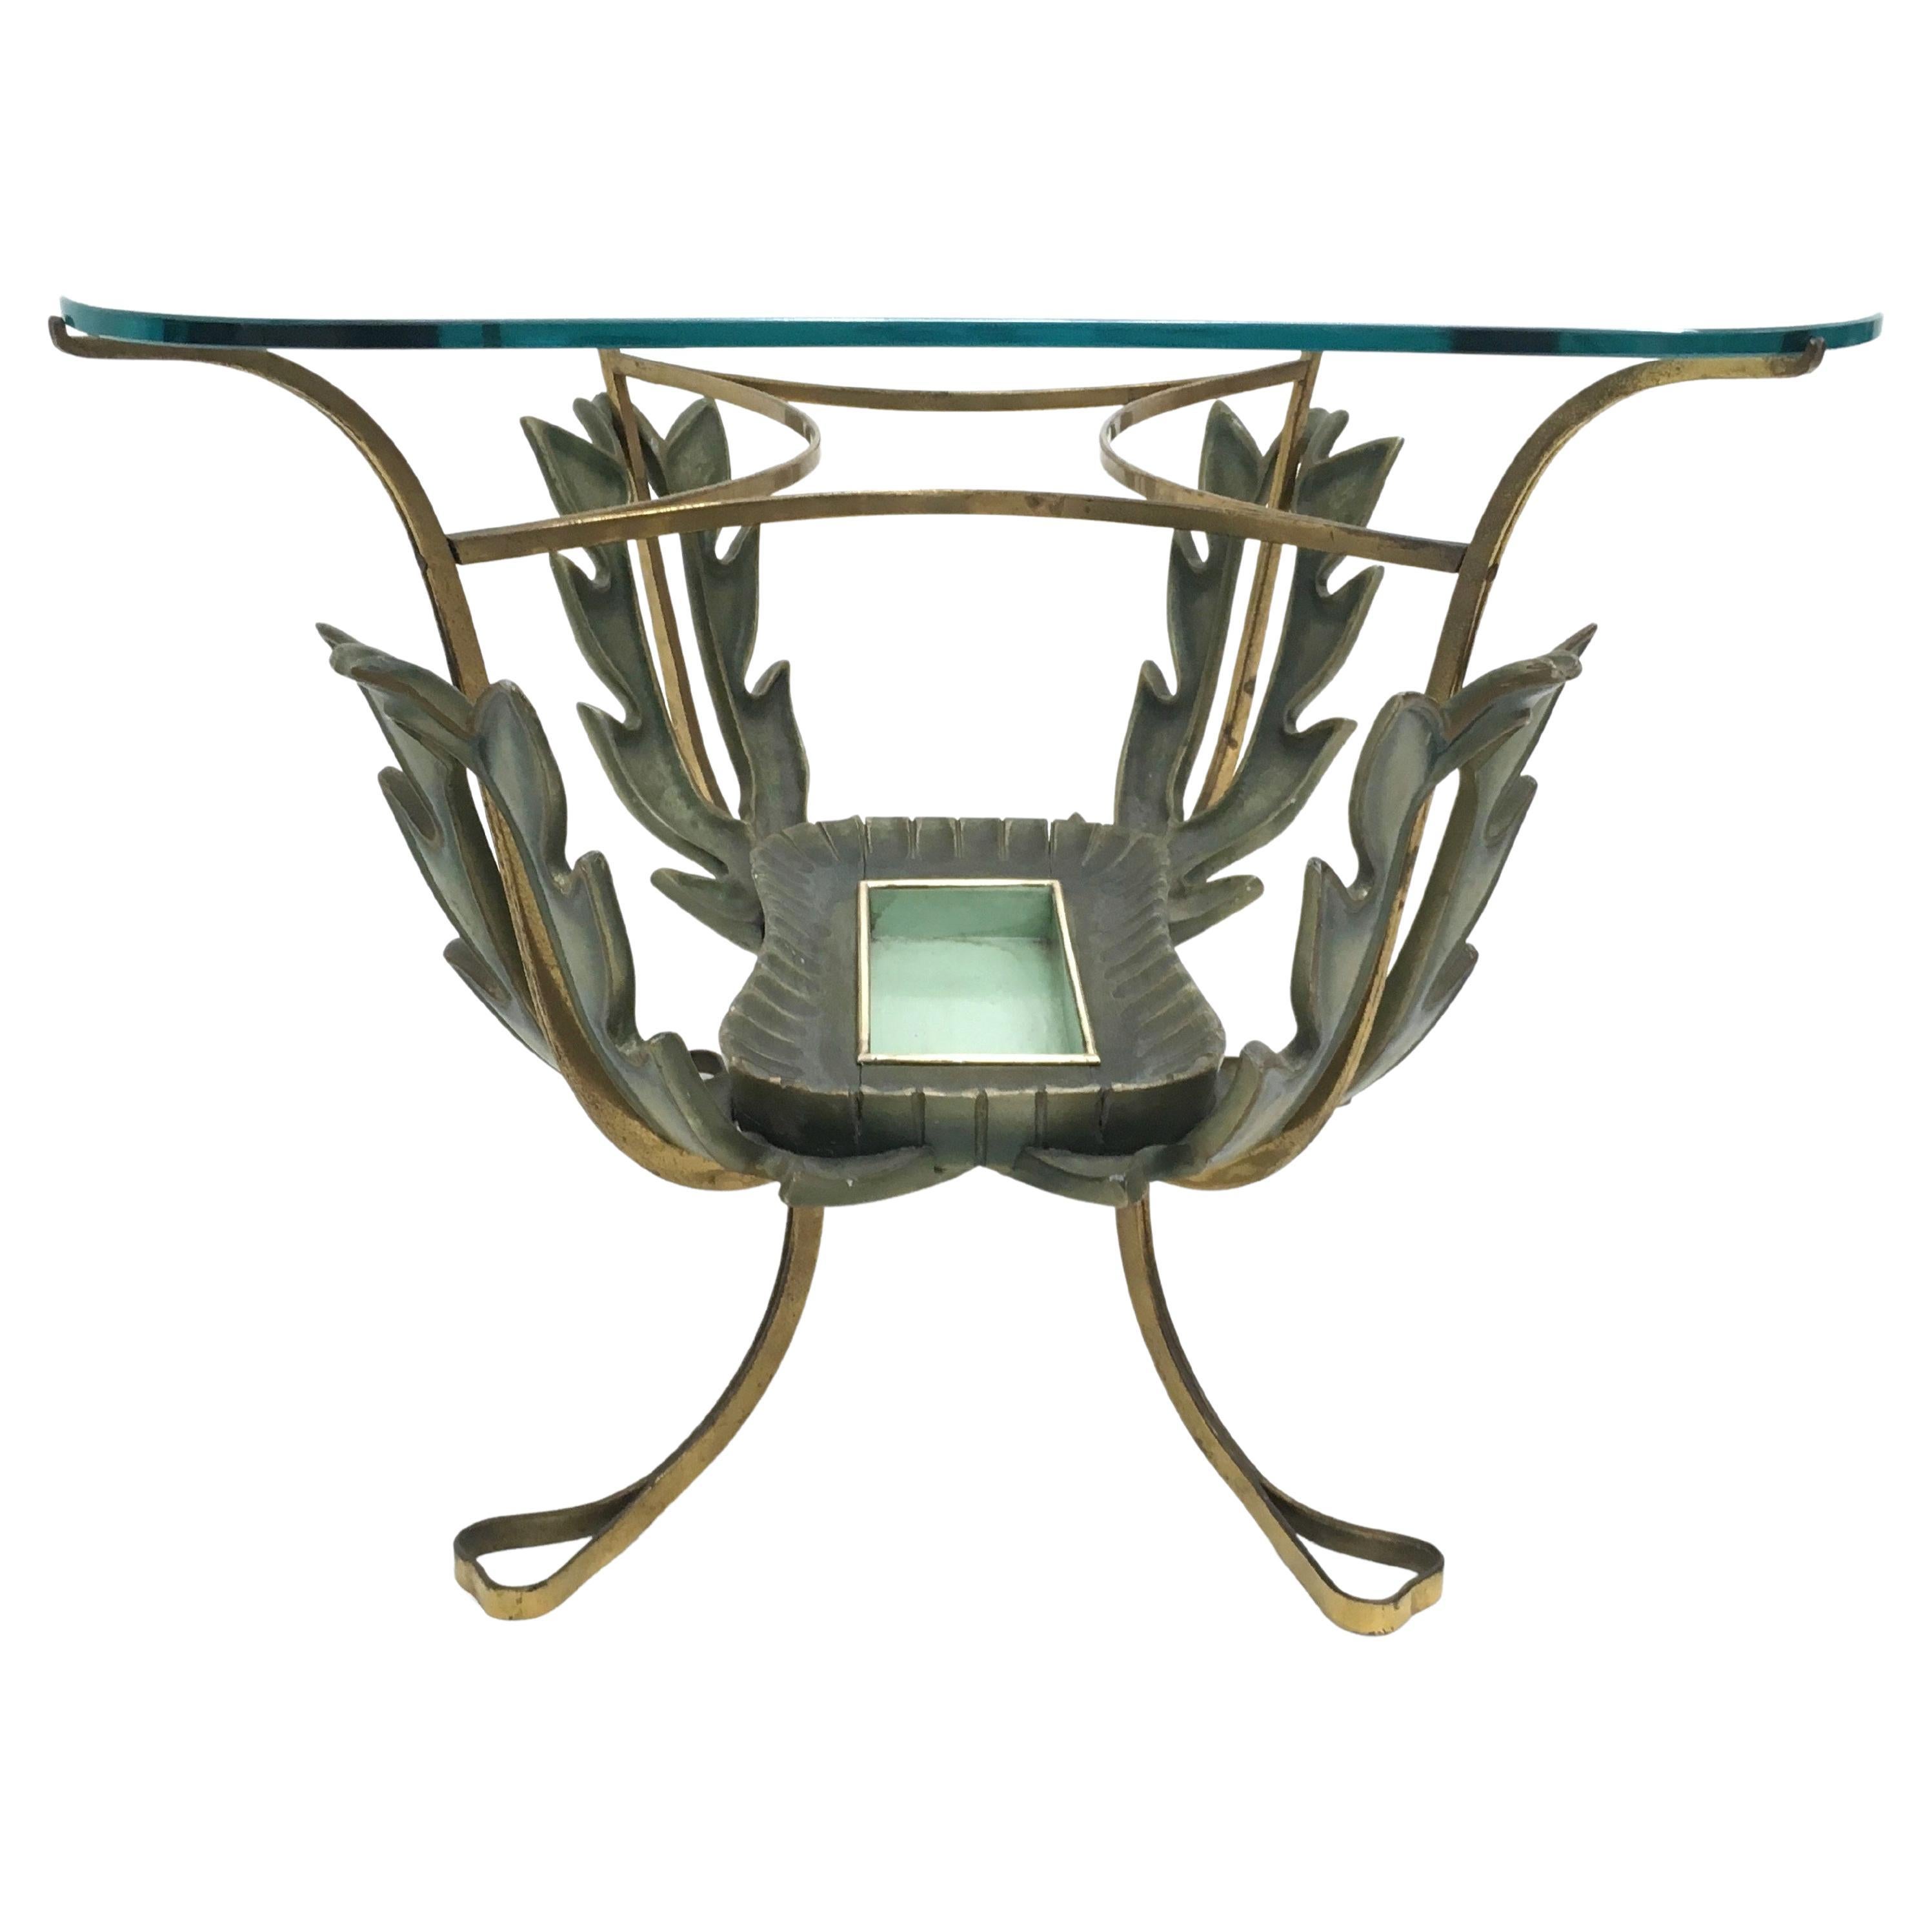 Vintage Brass and Varnished Metal Coffee Table by Pierluigi Colli, Italy